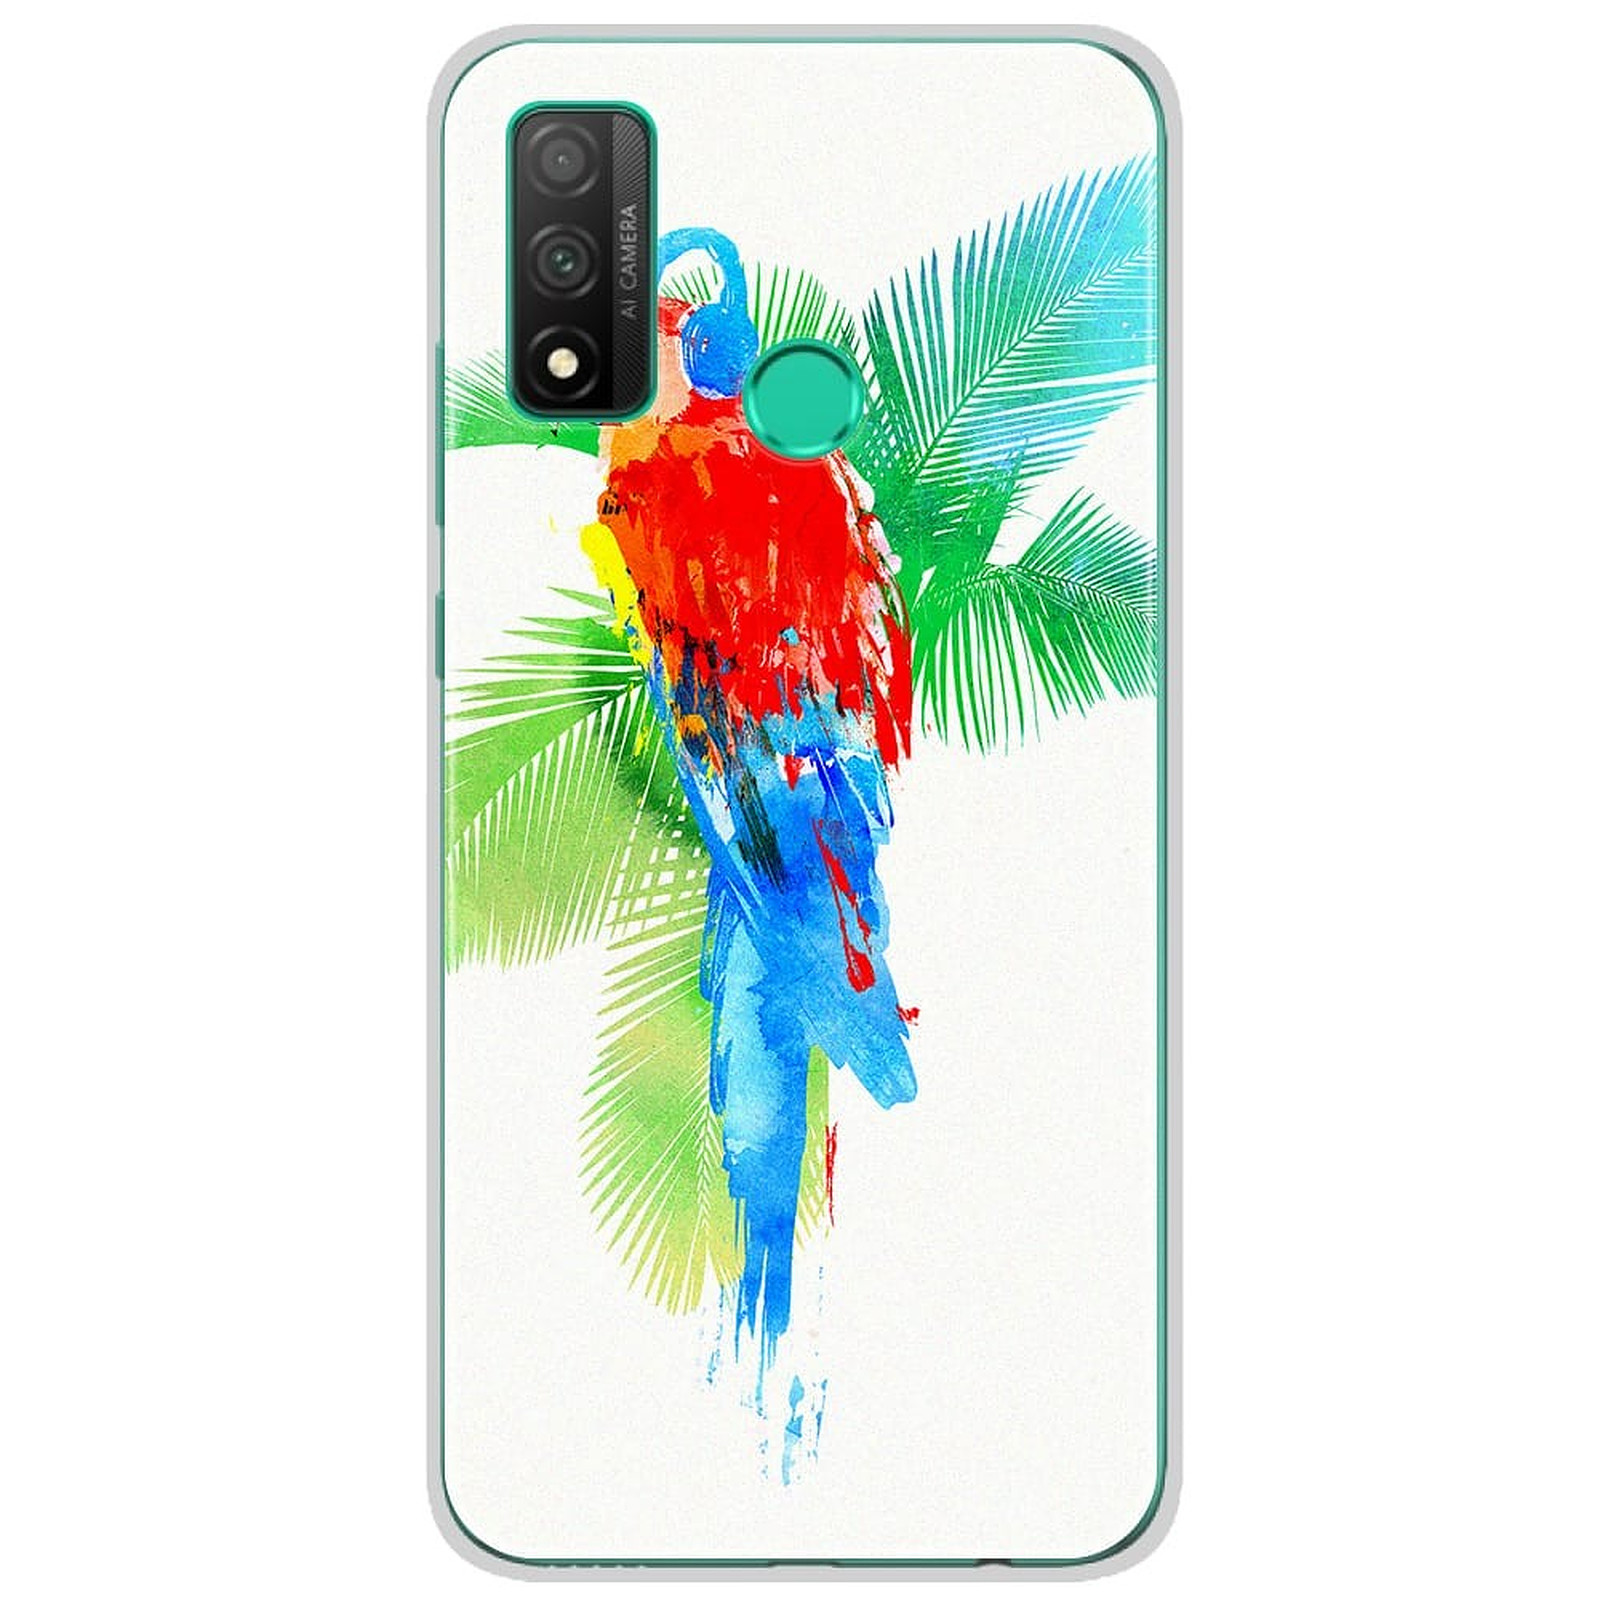 1001 Coques Coque silicone gel Huawei P Smart 2020 motif RF Tropical party - Coque telephone 1001Coques